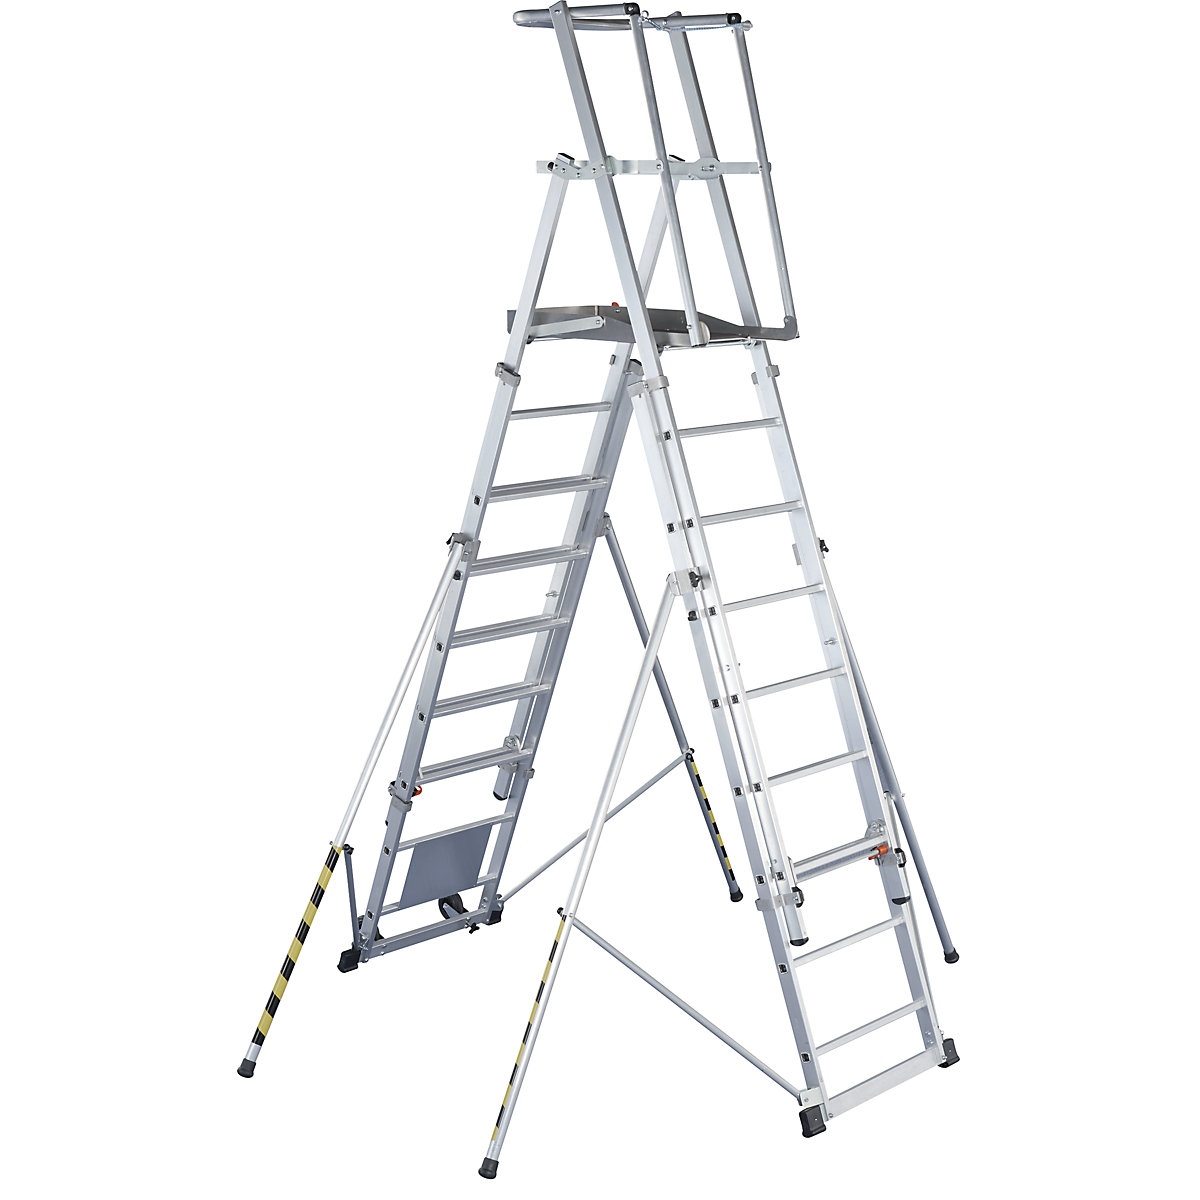 Telescopic mobile safety steps – ZARGES, made of aluminium, 12 rungs with stabilisers-4